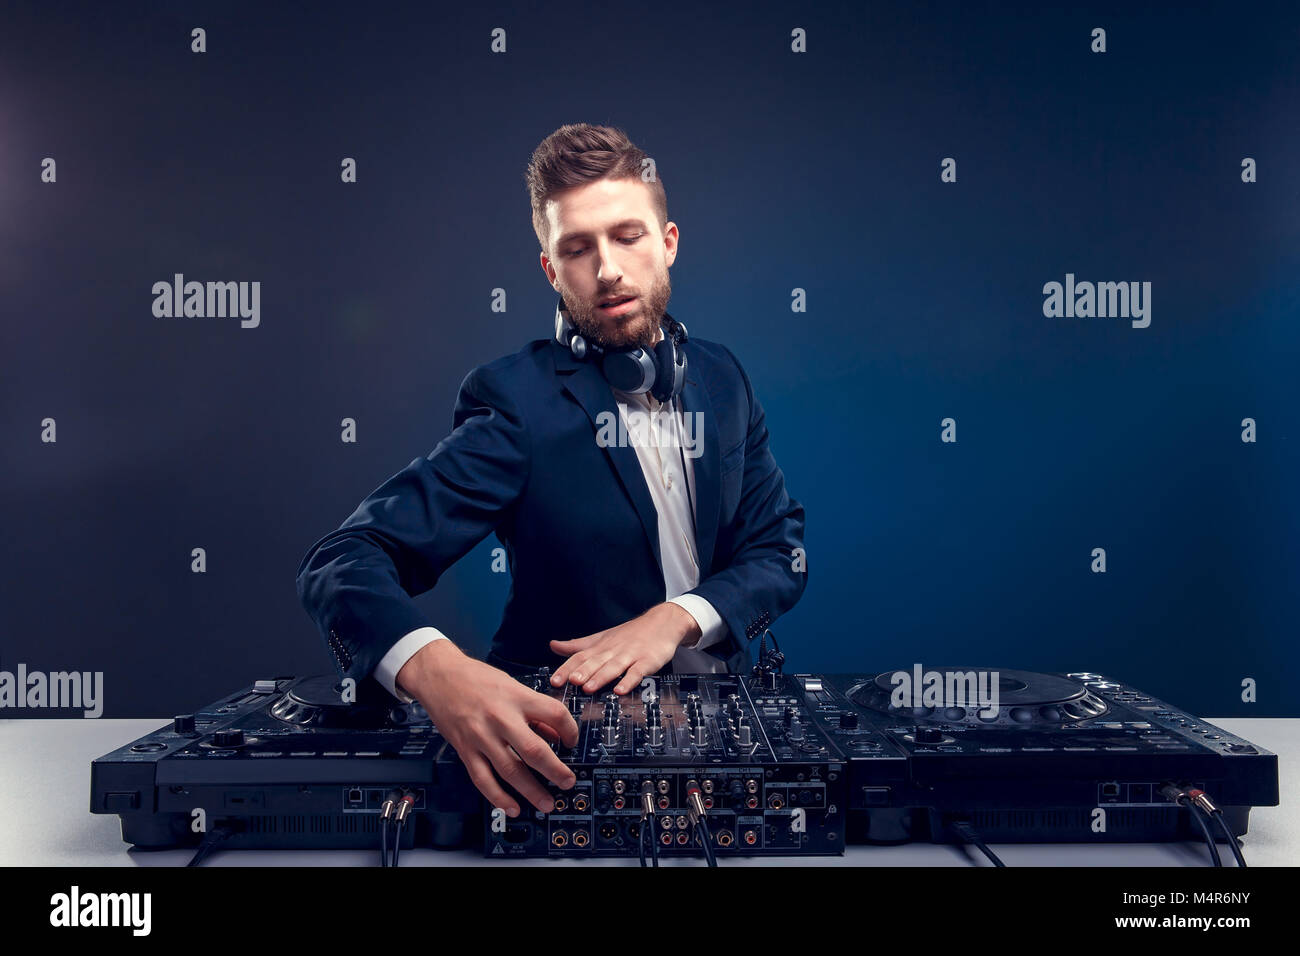 Closeup portrait of confident DJ with stylish hair style and headphones on neck mixing music on mixer while standing isolated on dark colored blue, cyan background Stock Photo